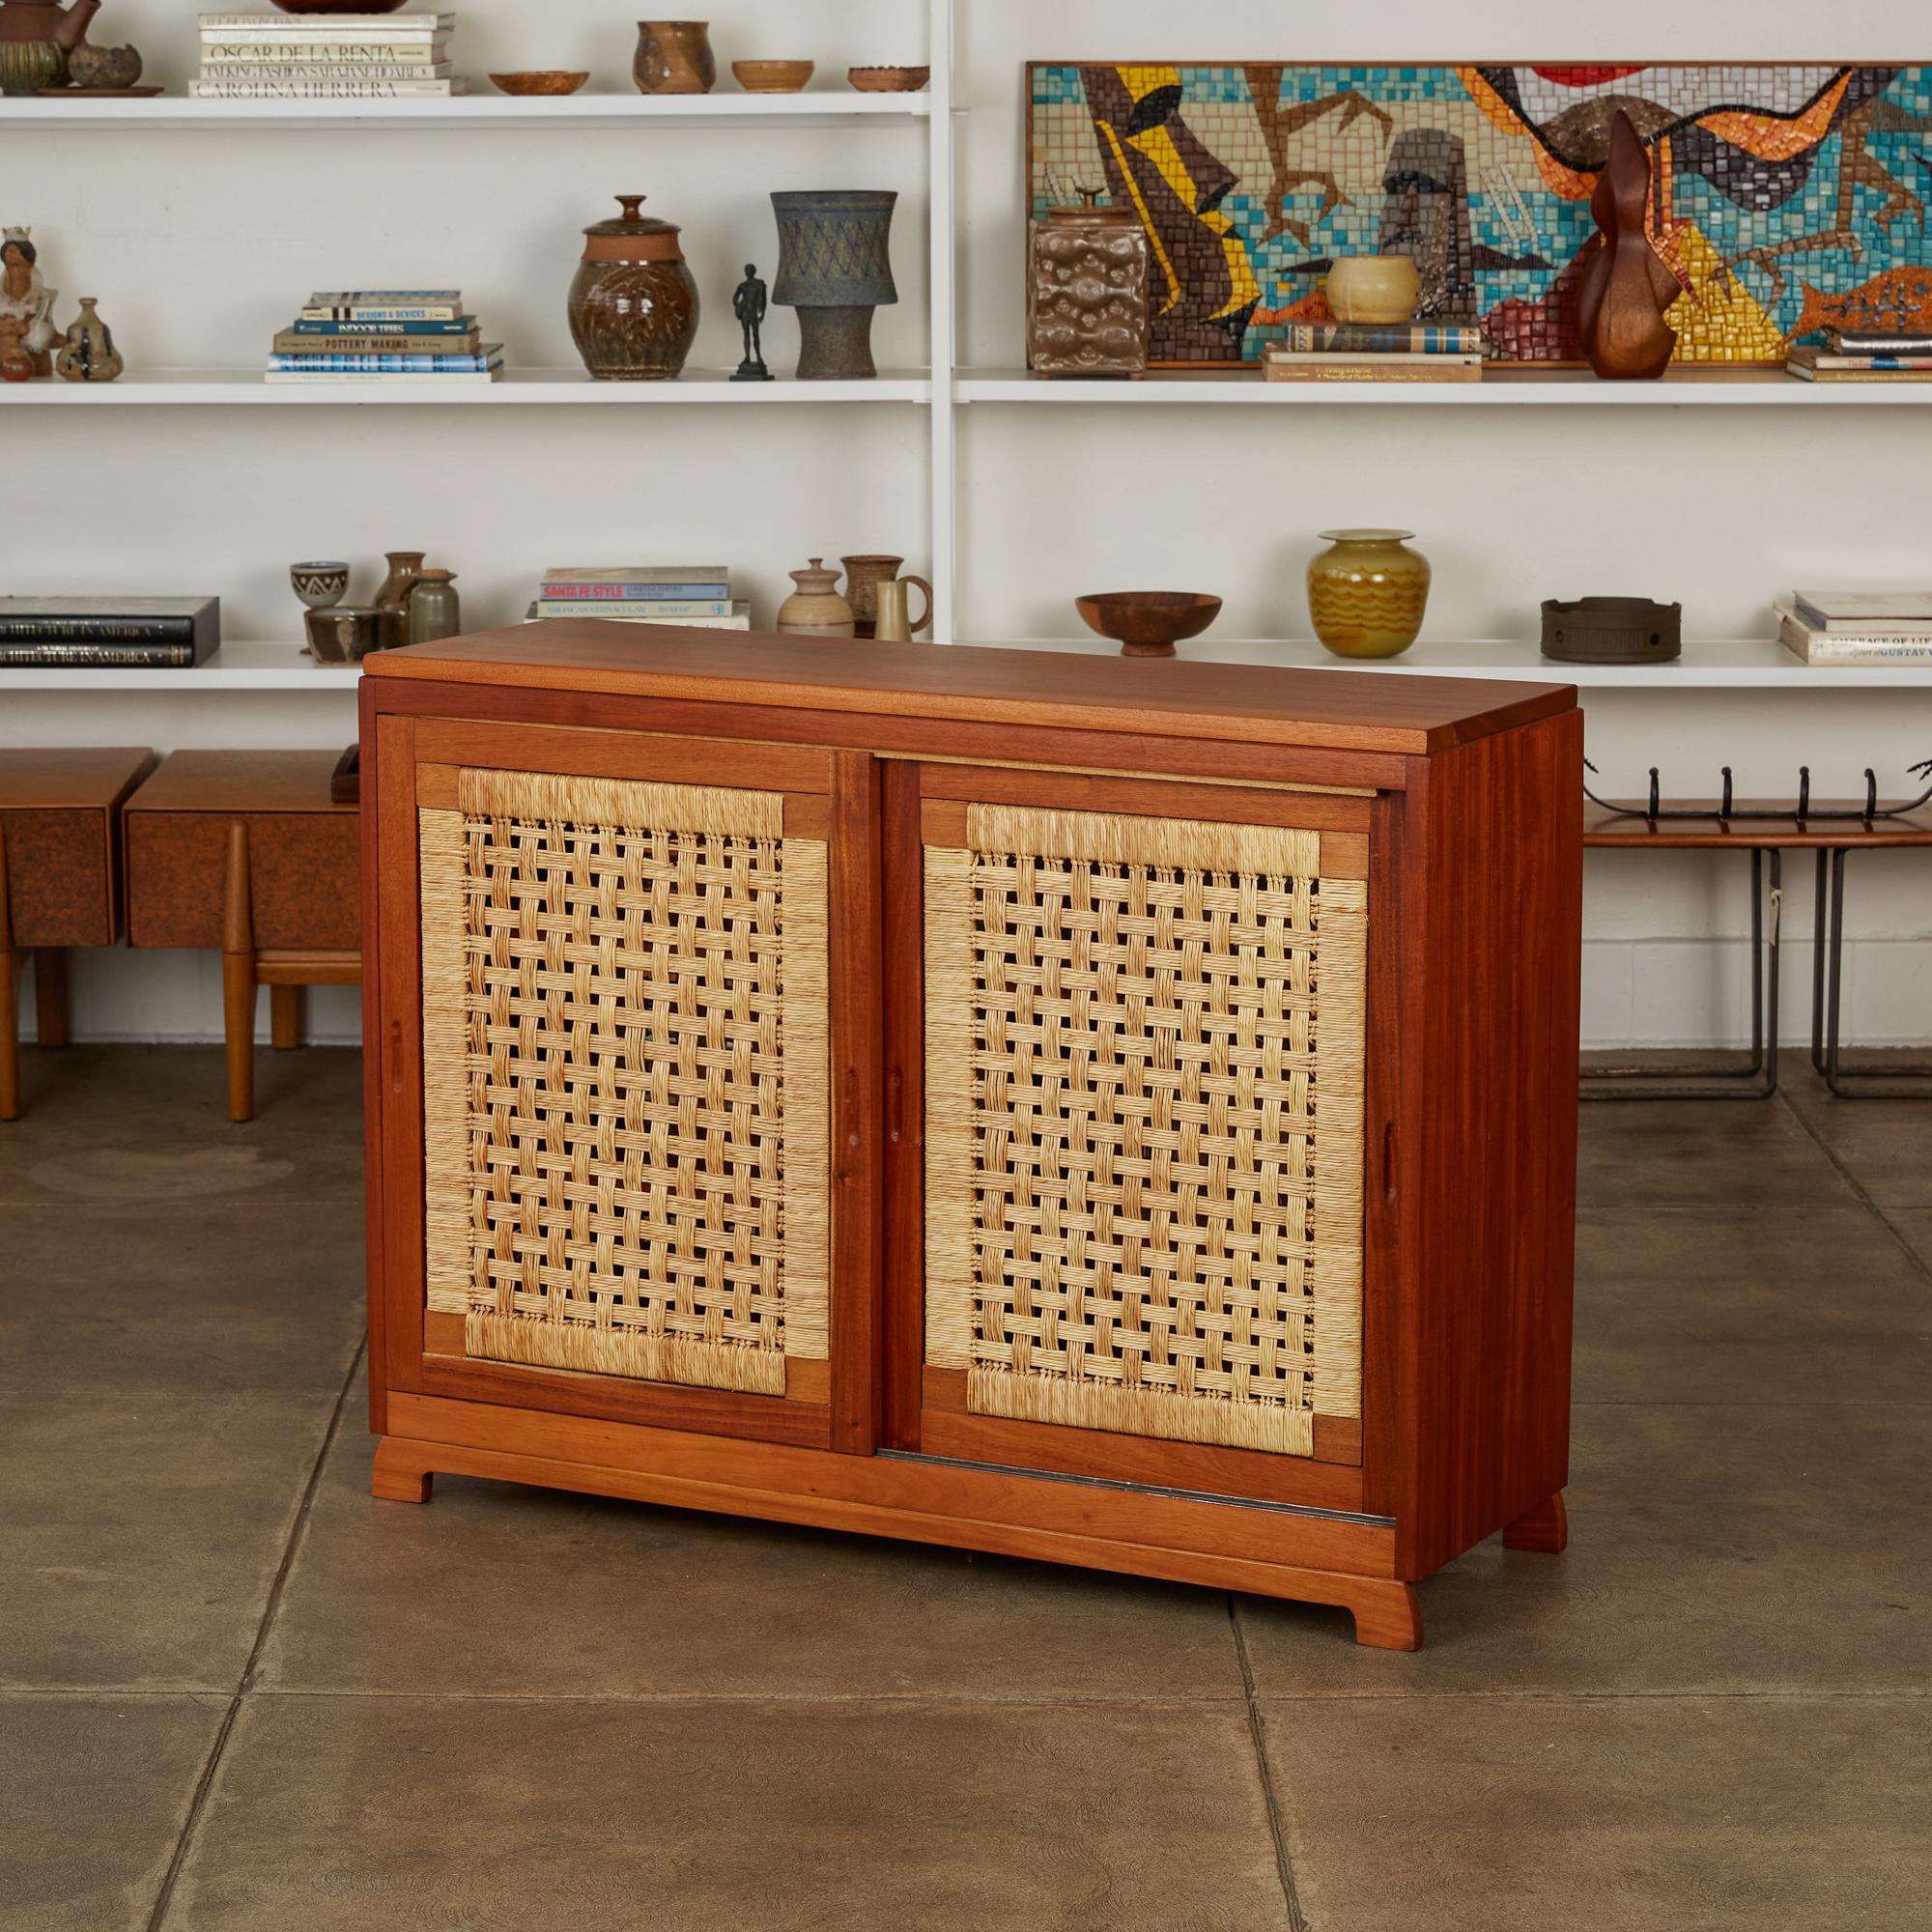 Bauhaus-trained, Mexico City-based Michael van Beuren created highly functional modern design inspired by Mexican vernacular styles and materials. This example is a compact solid mahogany credenza with double sliding doors on either side. The four